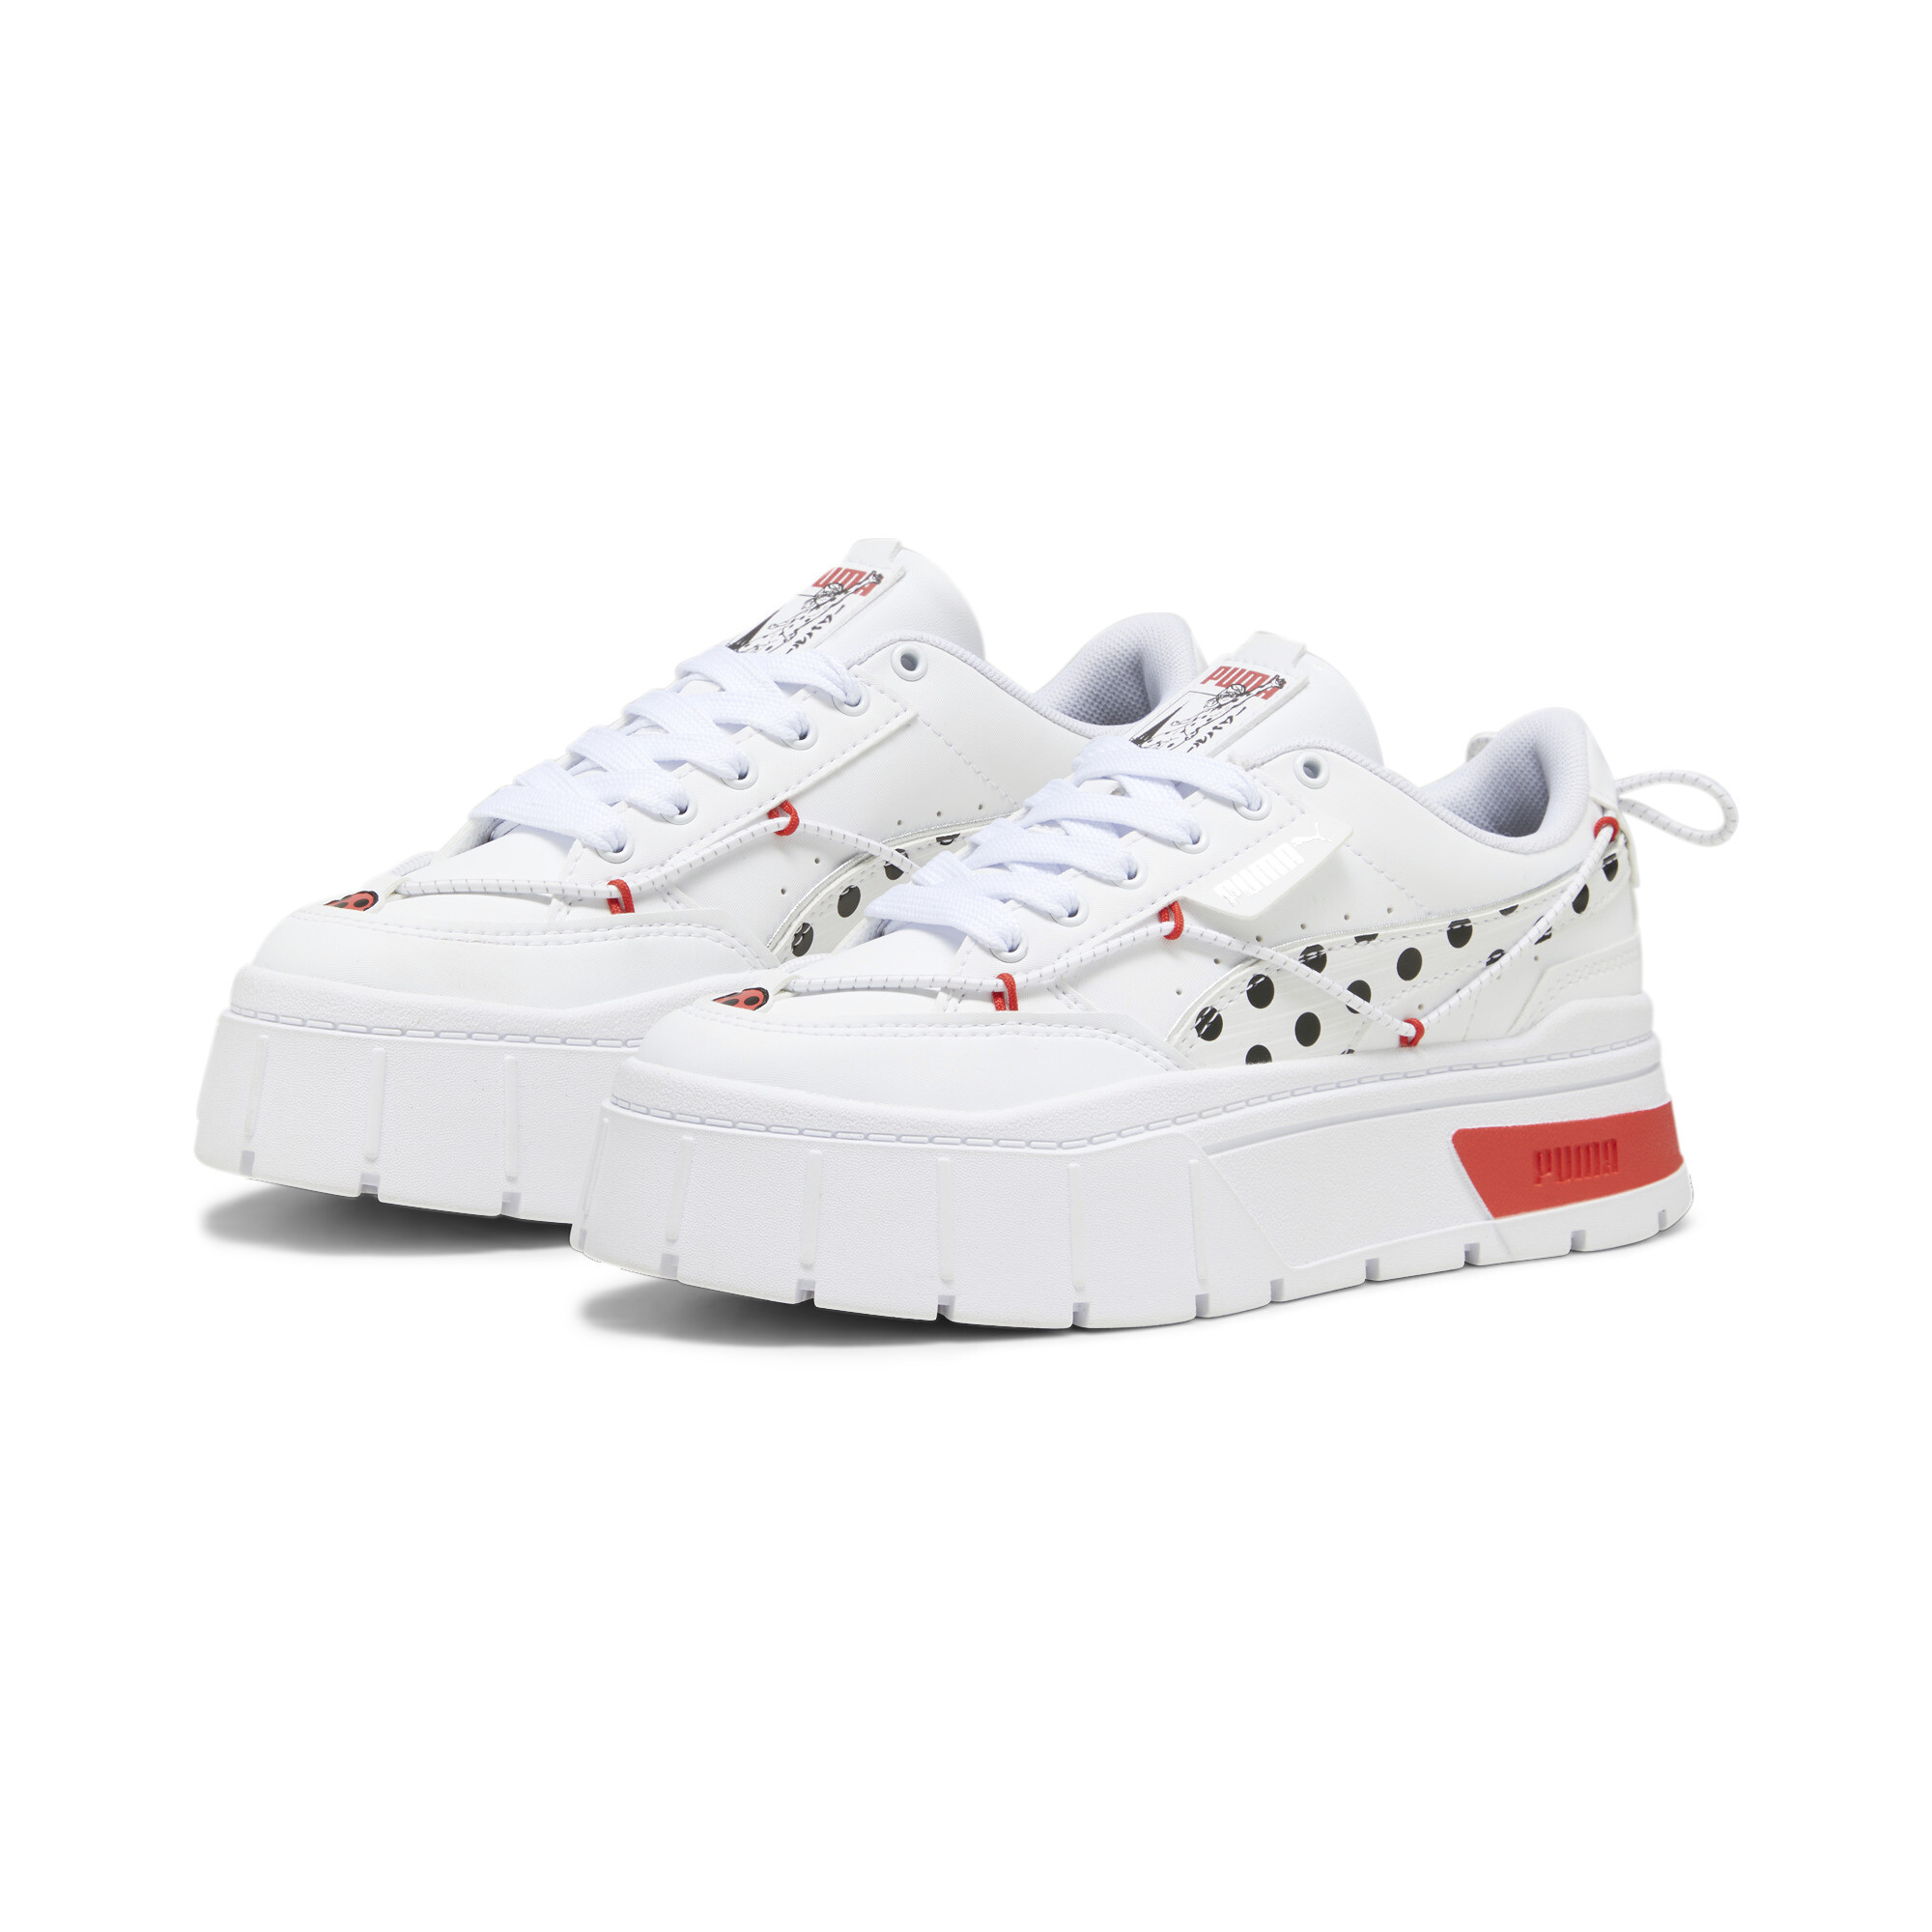 PUMA X MIRACULOUS Mayze Stack Youth Sneakers In White, Size EU 38.5